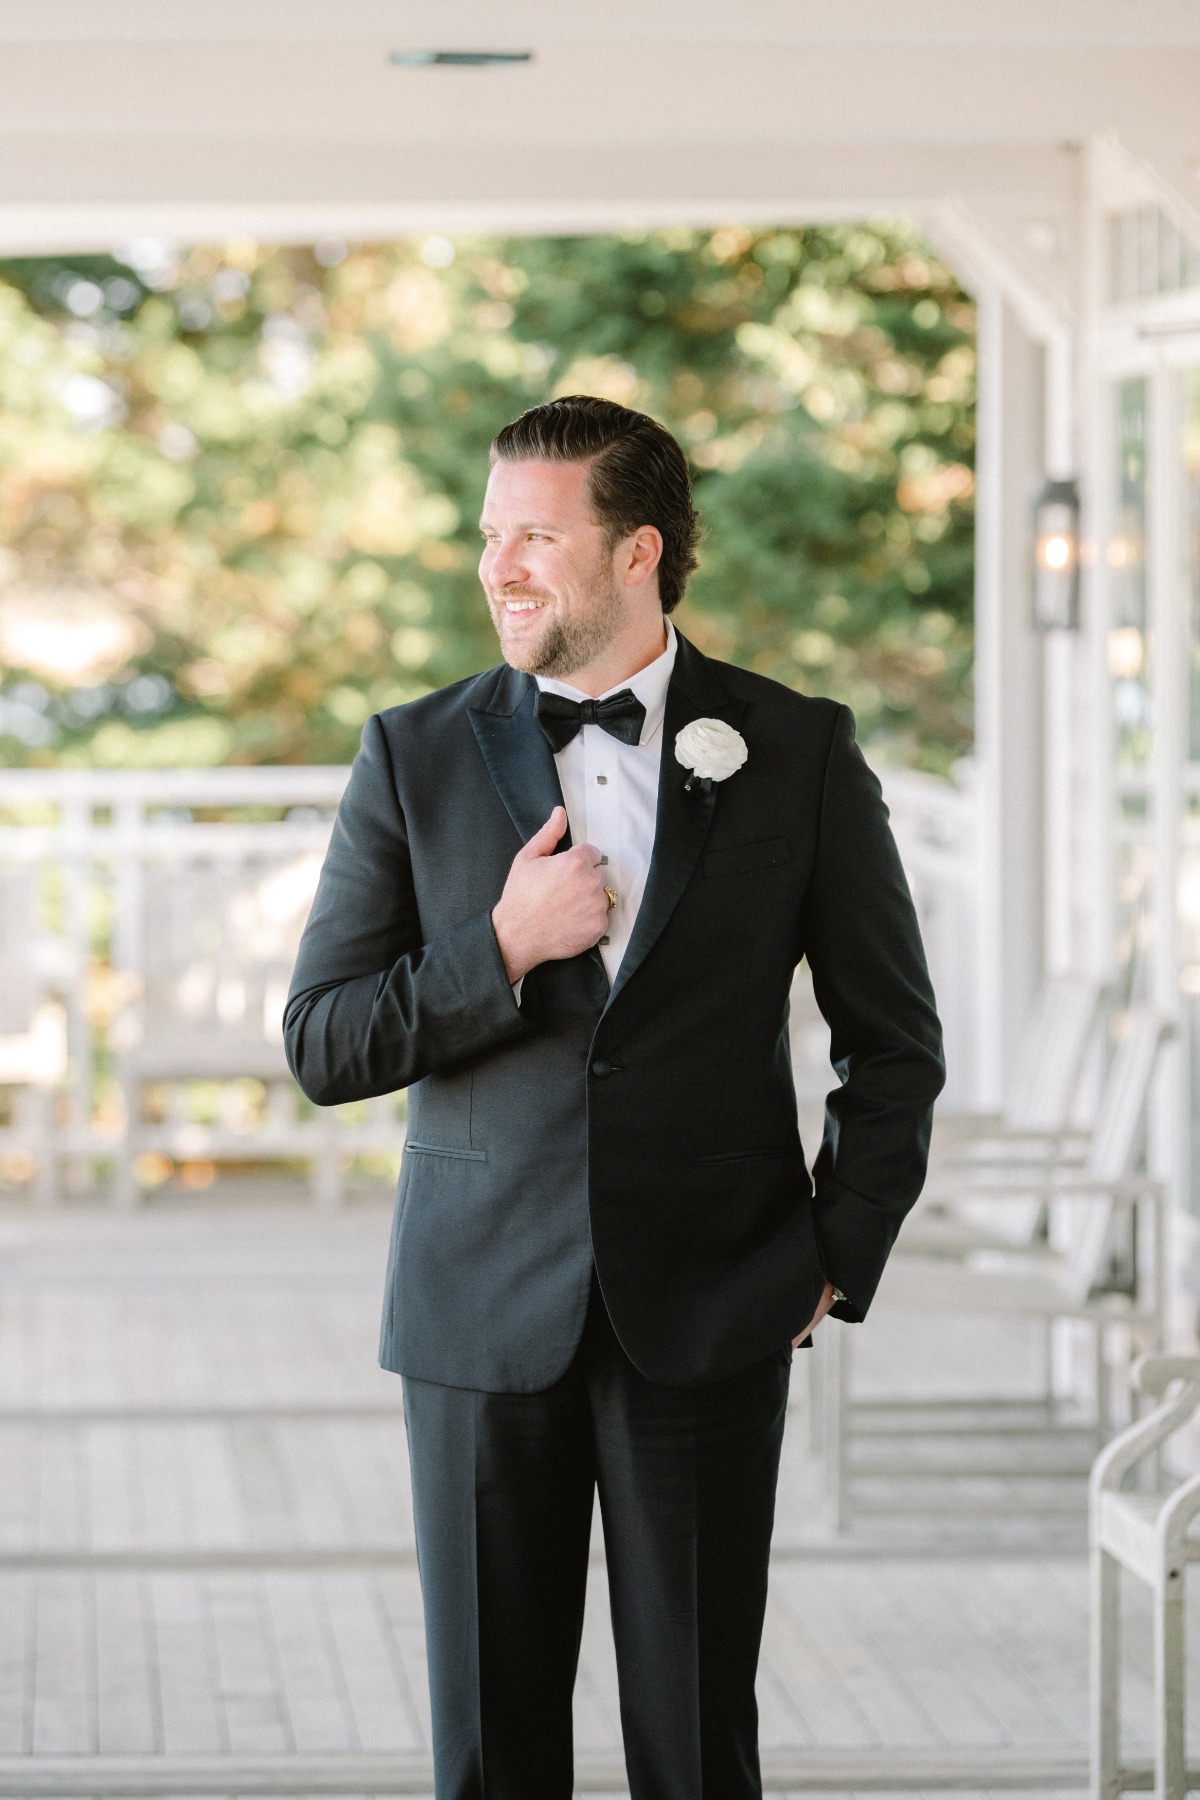 Timeless Cape Cod groom in classic black and white tuxedo